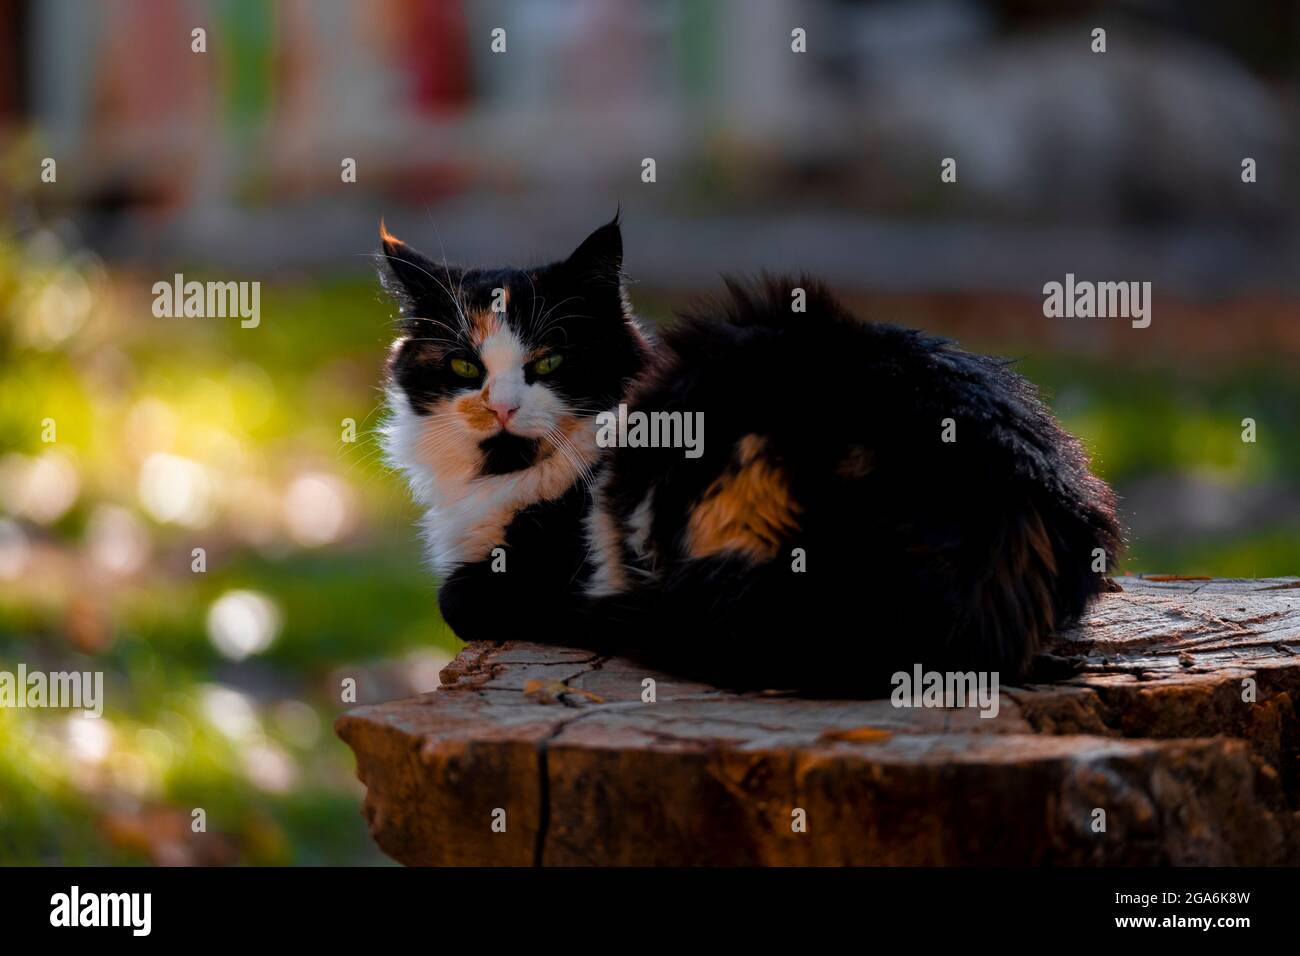 cat napping on a log Stock Photo